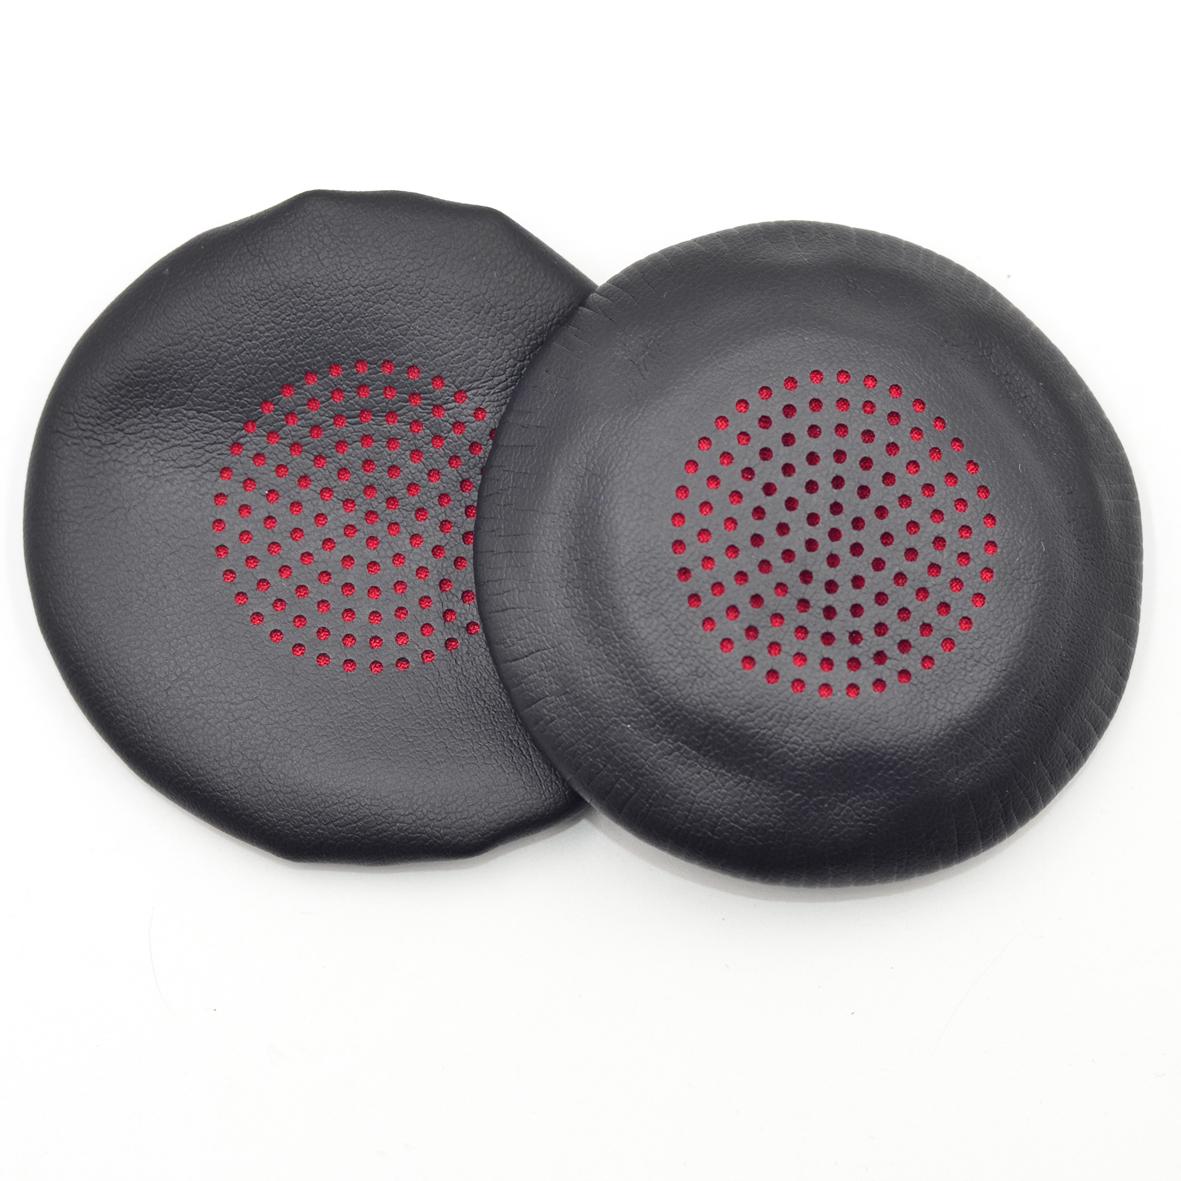 defean Replacement Cushion Ear Pads Covers for Plantronics Voyager ...